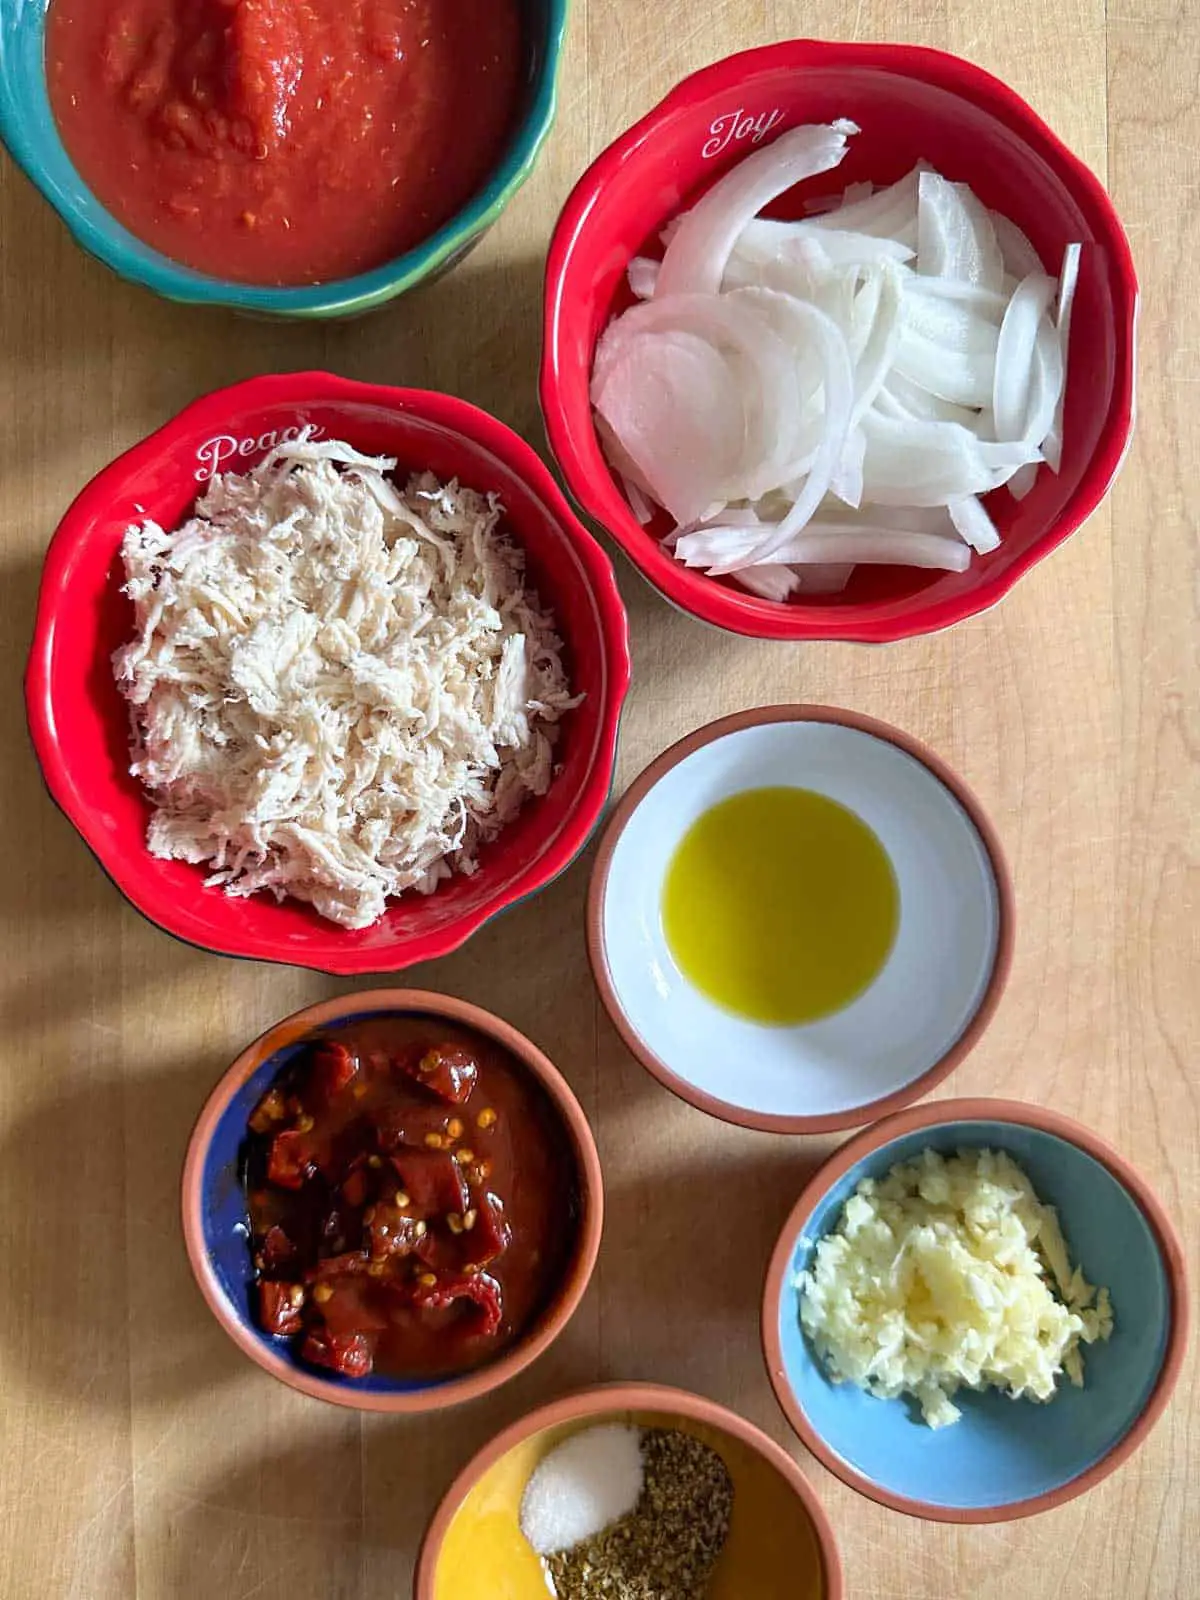 Bowls containing crushed tomatoes, sliced white onions, shredded chicken, chopped chipotle chilies in adobo sauce, olive oil, minced garlic, and seasonings.